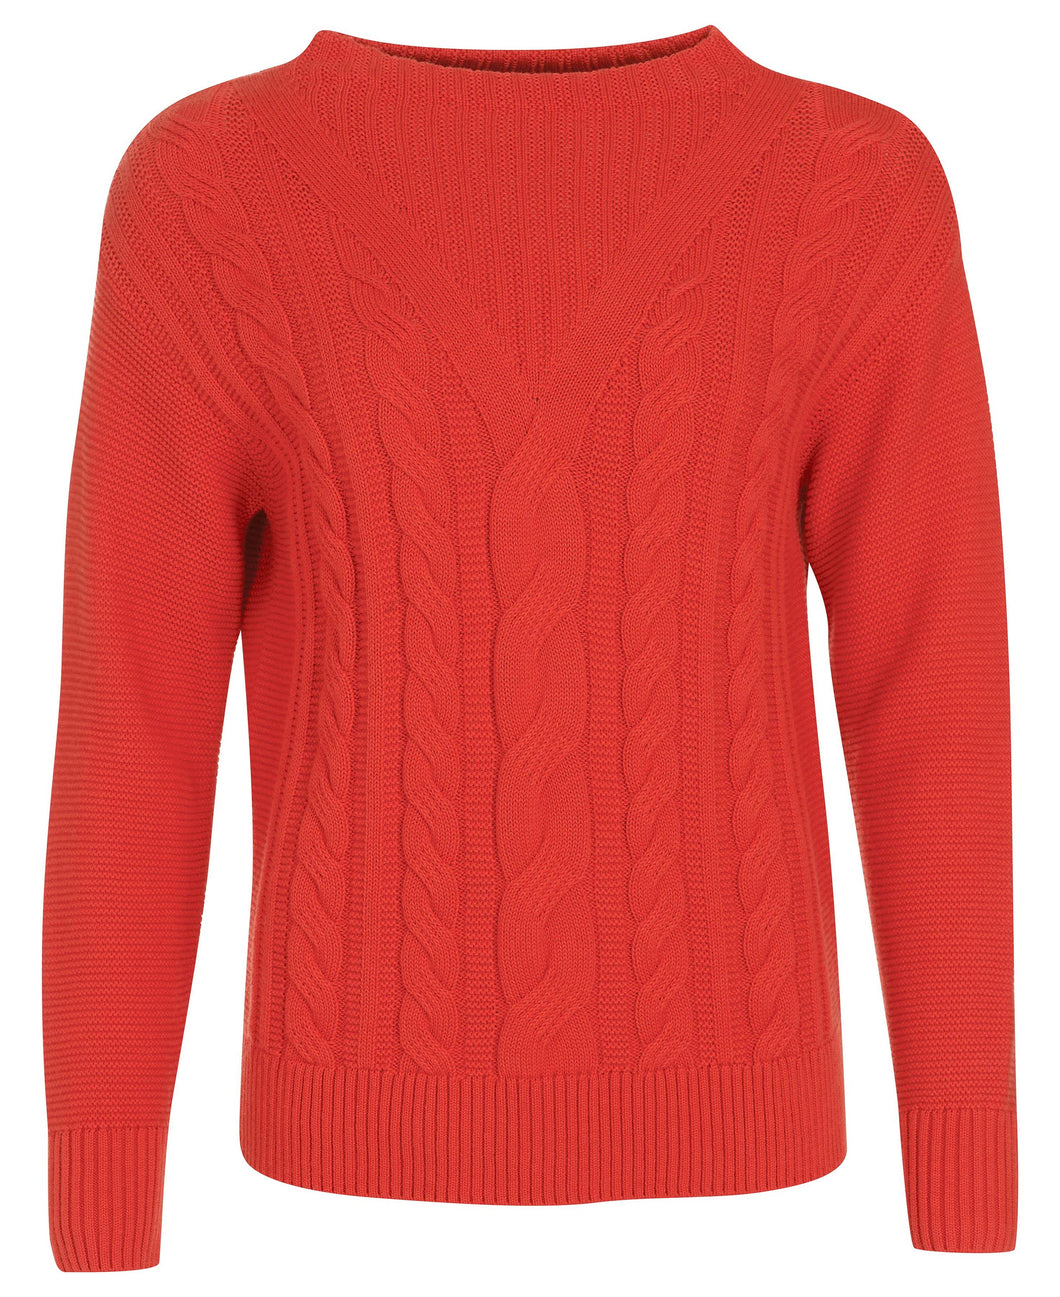 Barbour Foxton Knit in  Flame Red.